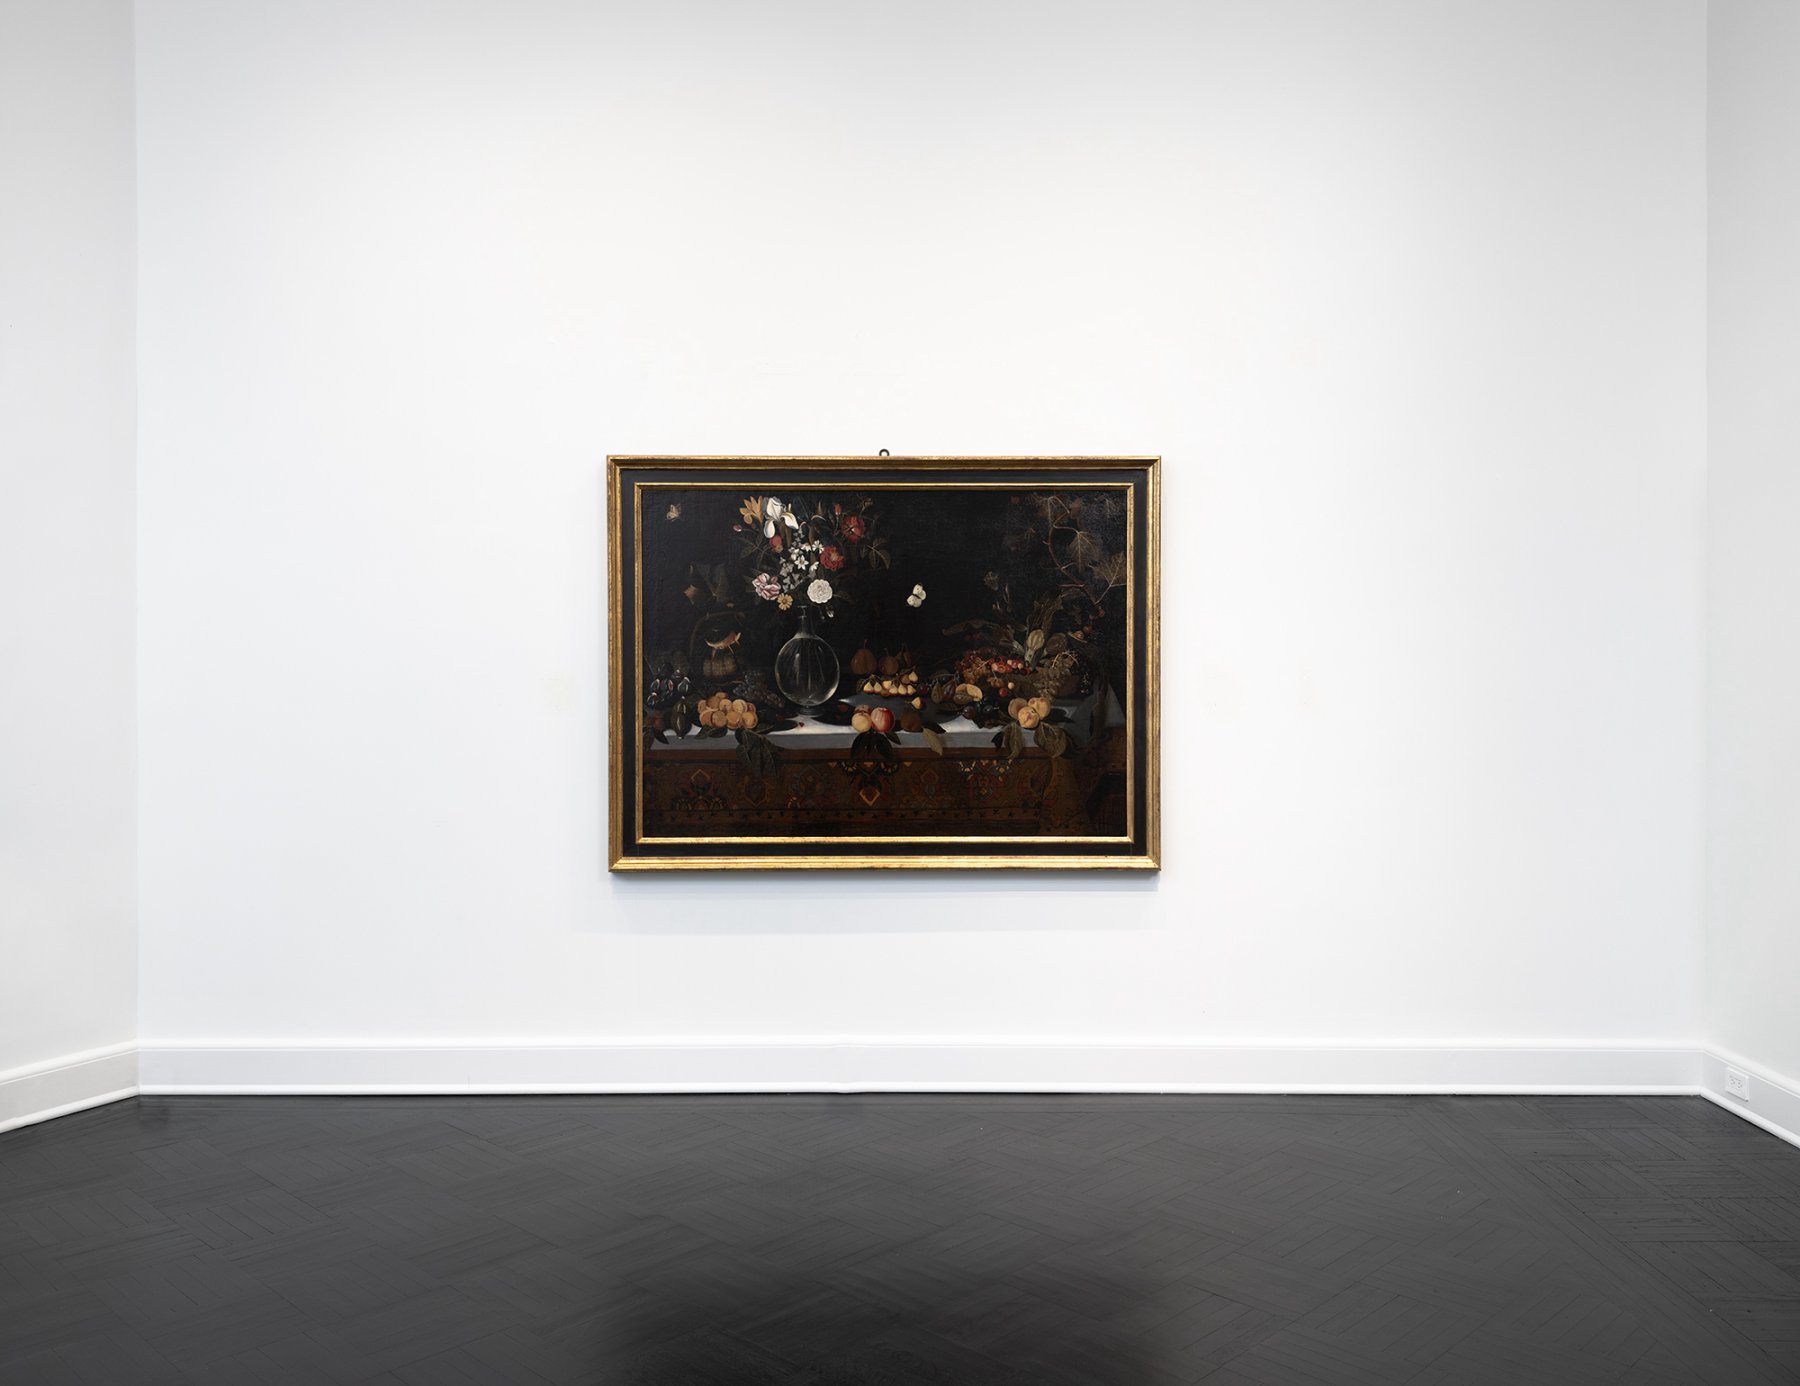 Installation image for Time Travel: Italian Masters through a Contemporary Lens, at Petzel